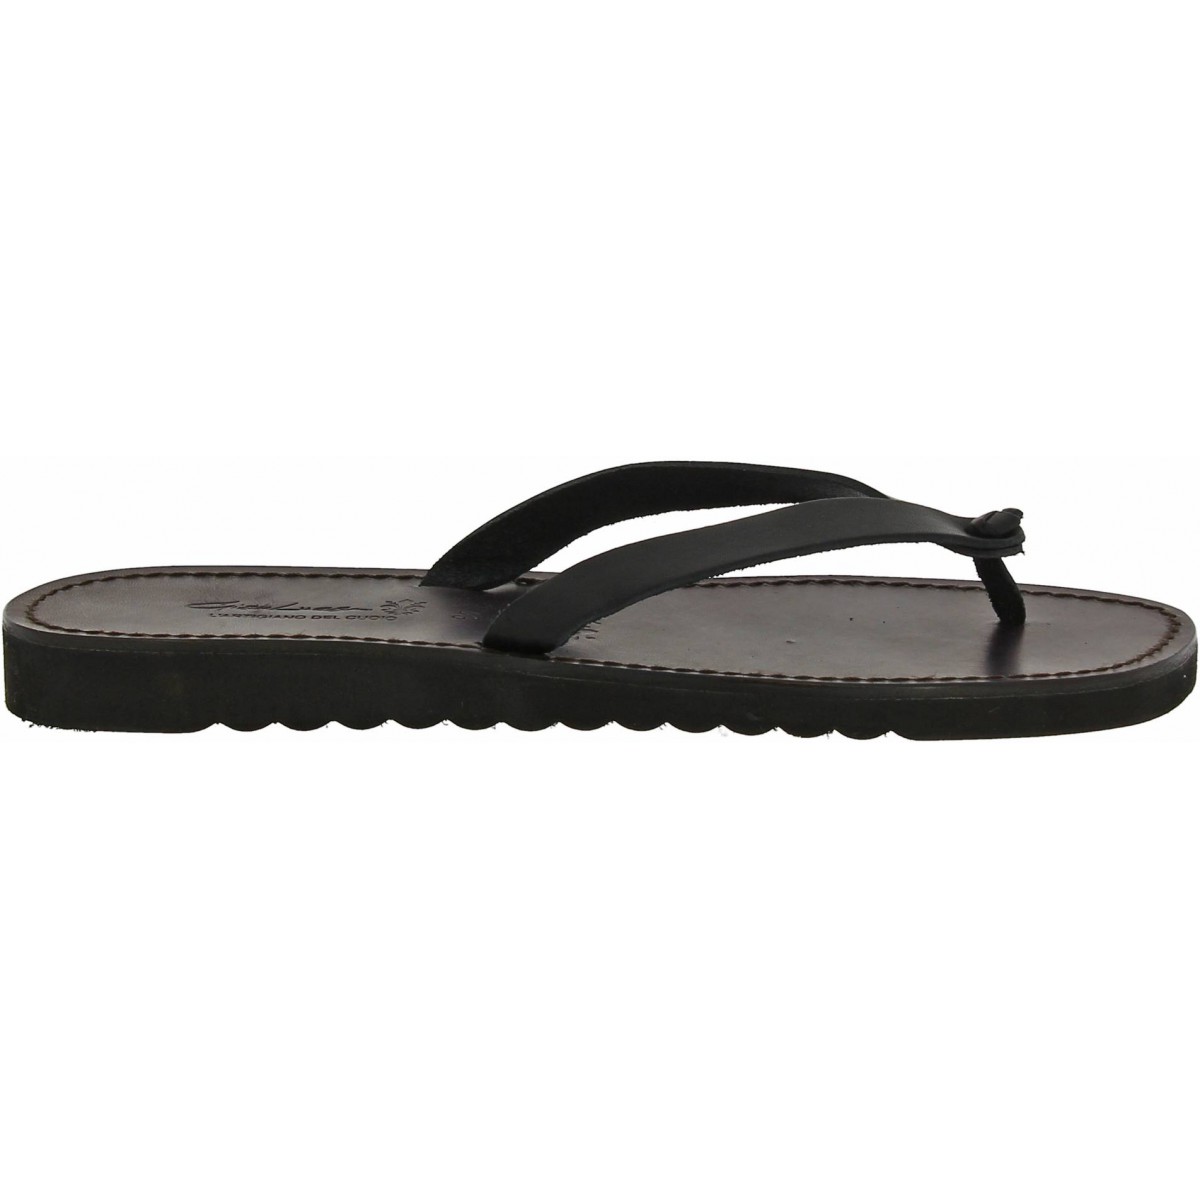 Black leather thongs sandals for men with thick rubber sole | The ...